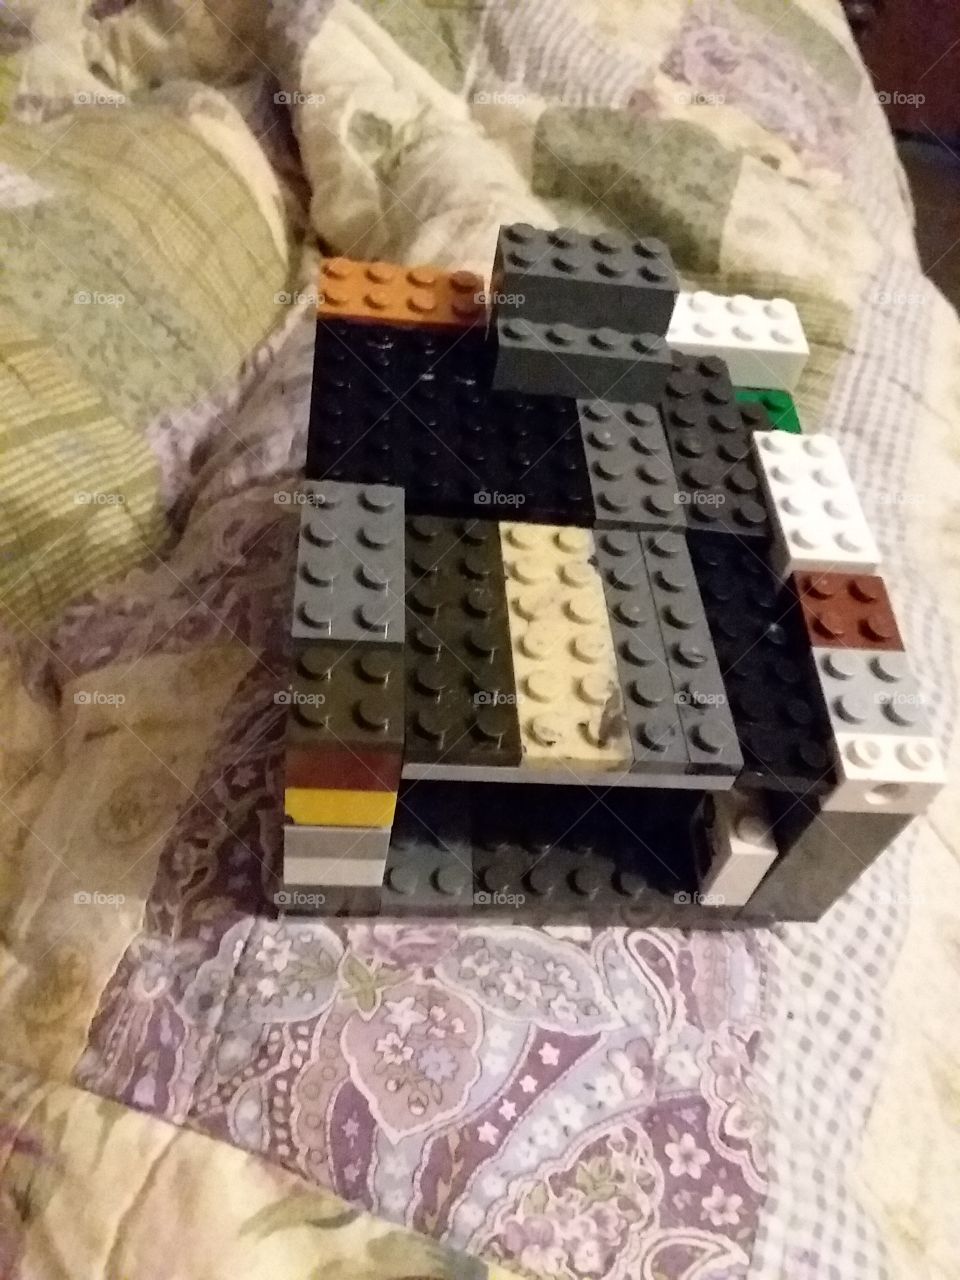 Lego piece made by my autistic son